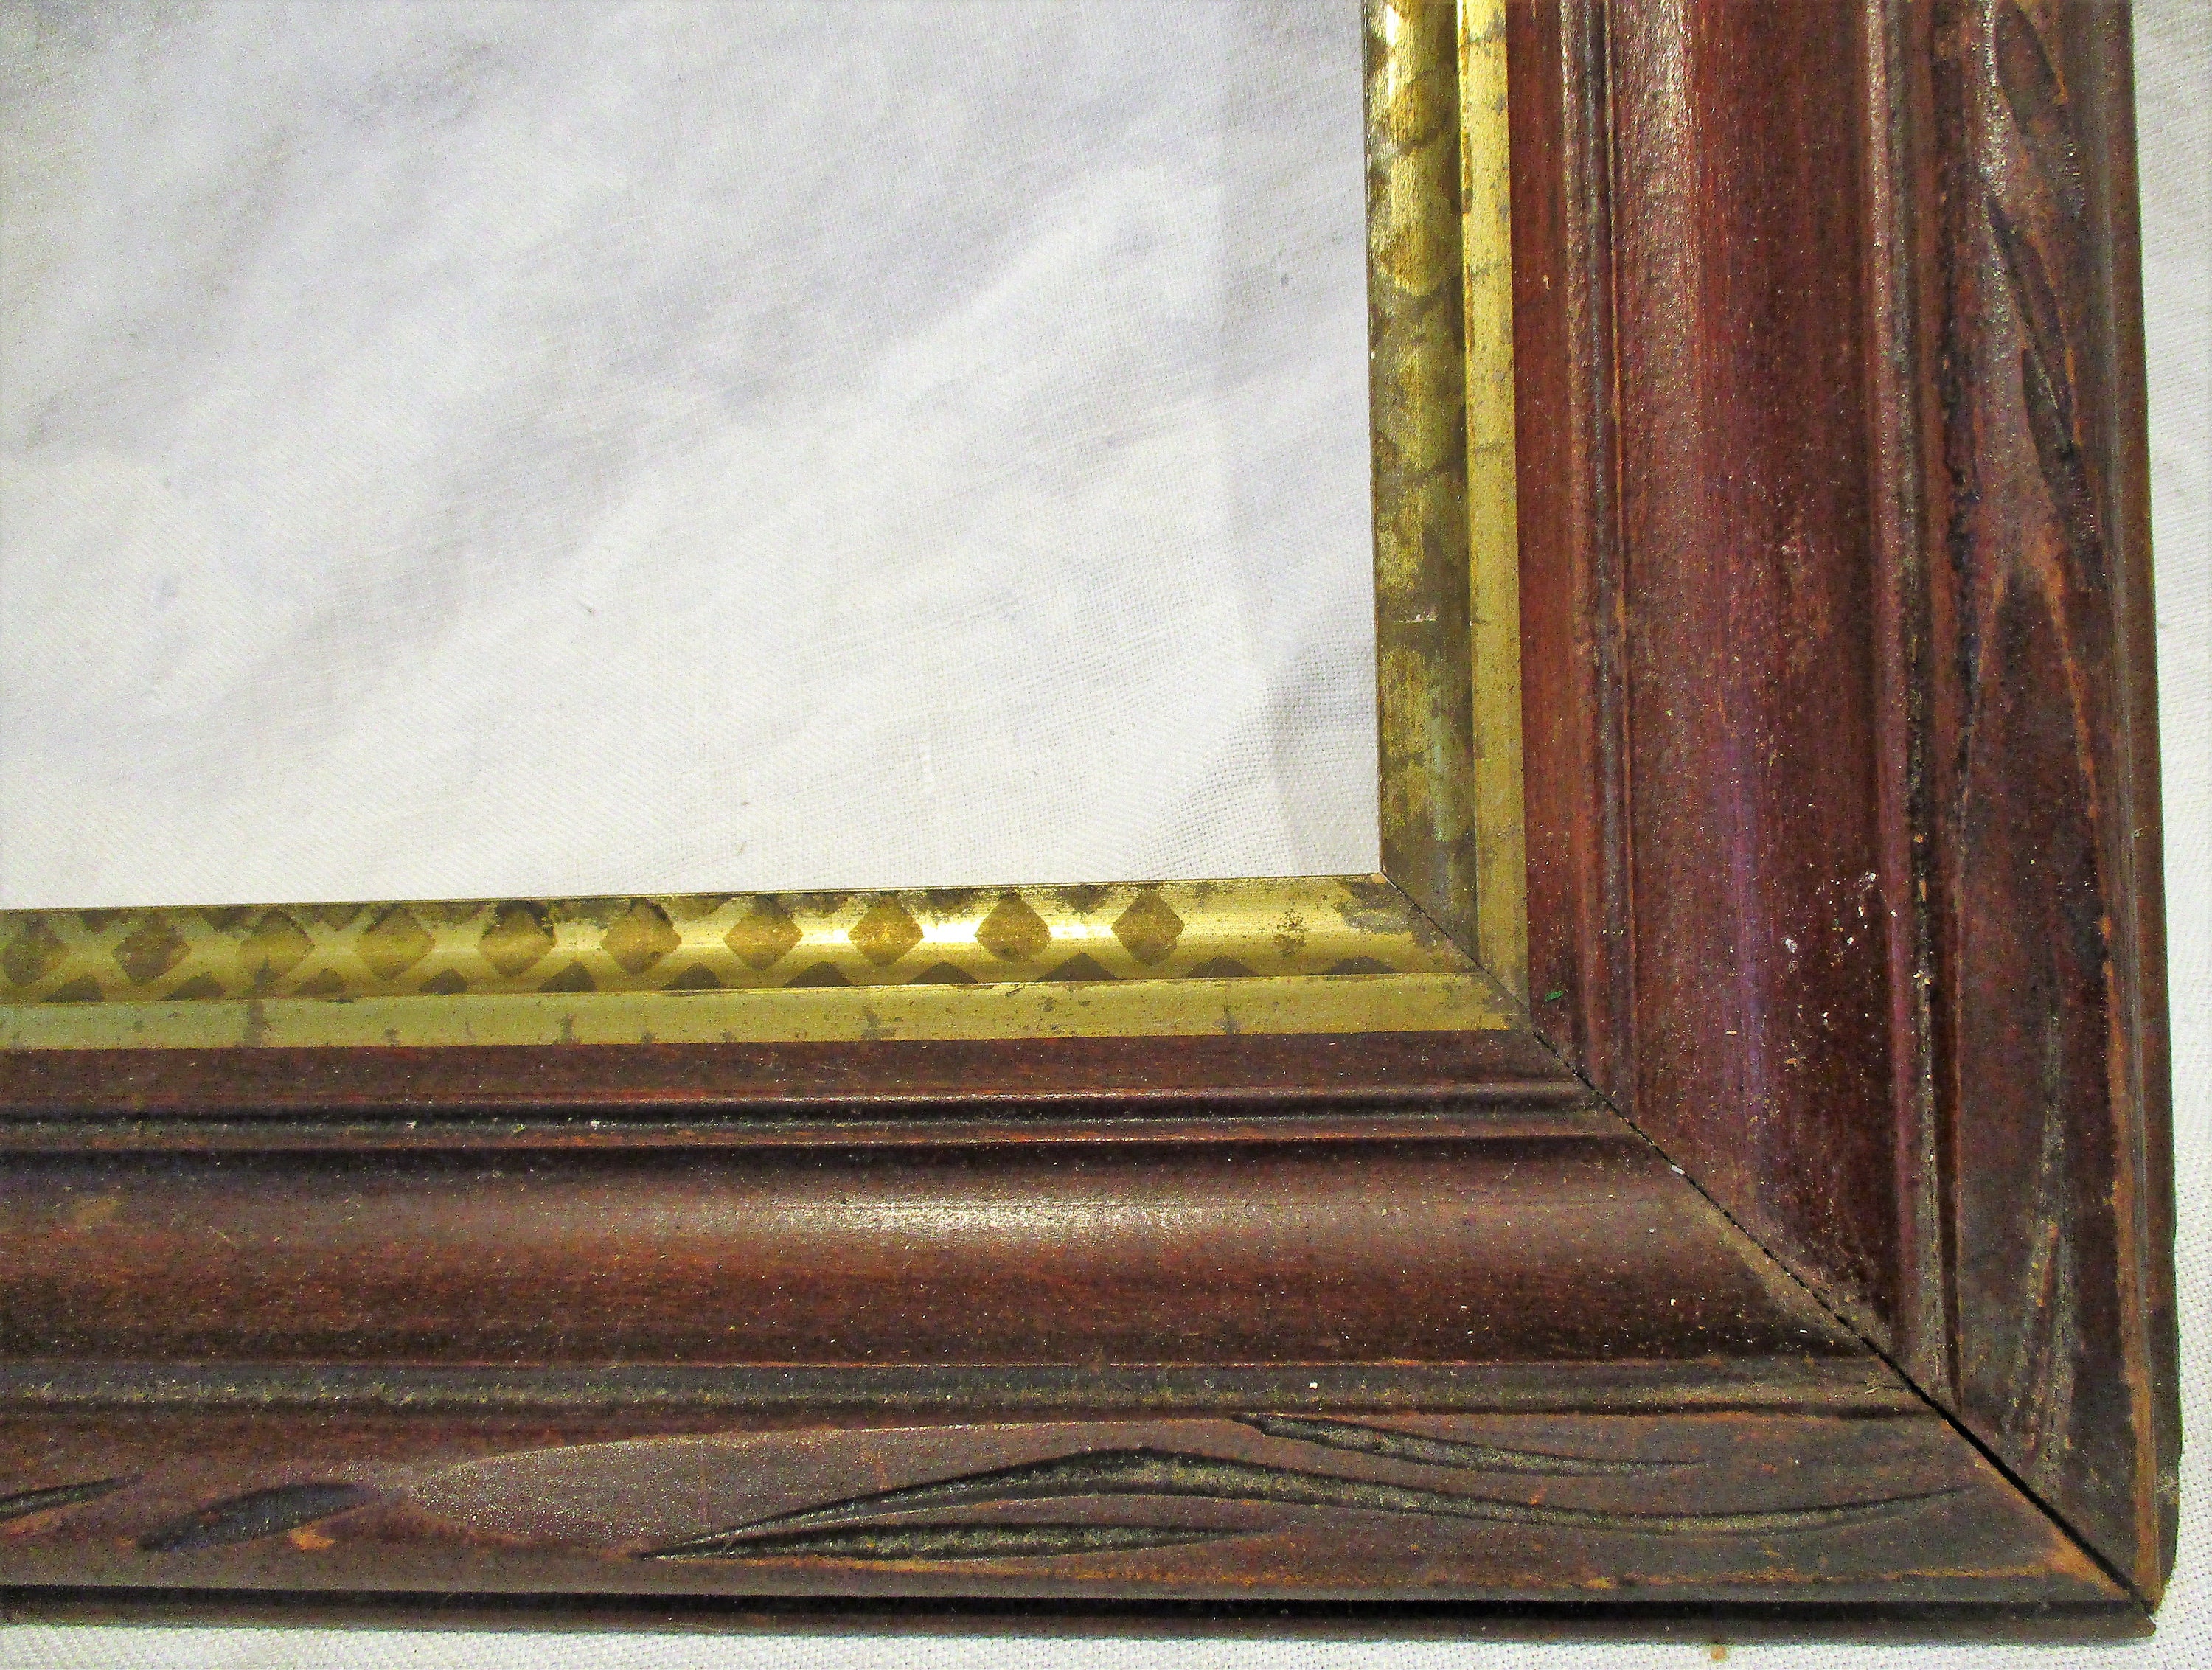 Antique Picture Frame with Brass Easel, 1800s for sale at Pamono